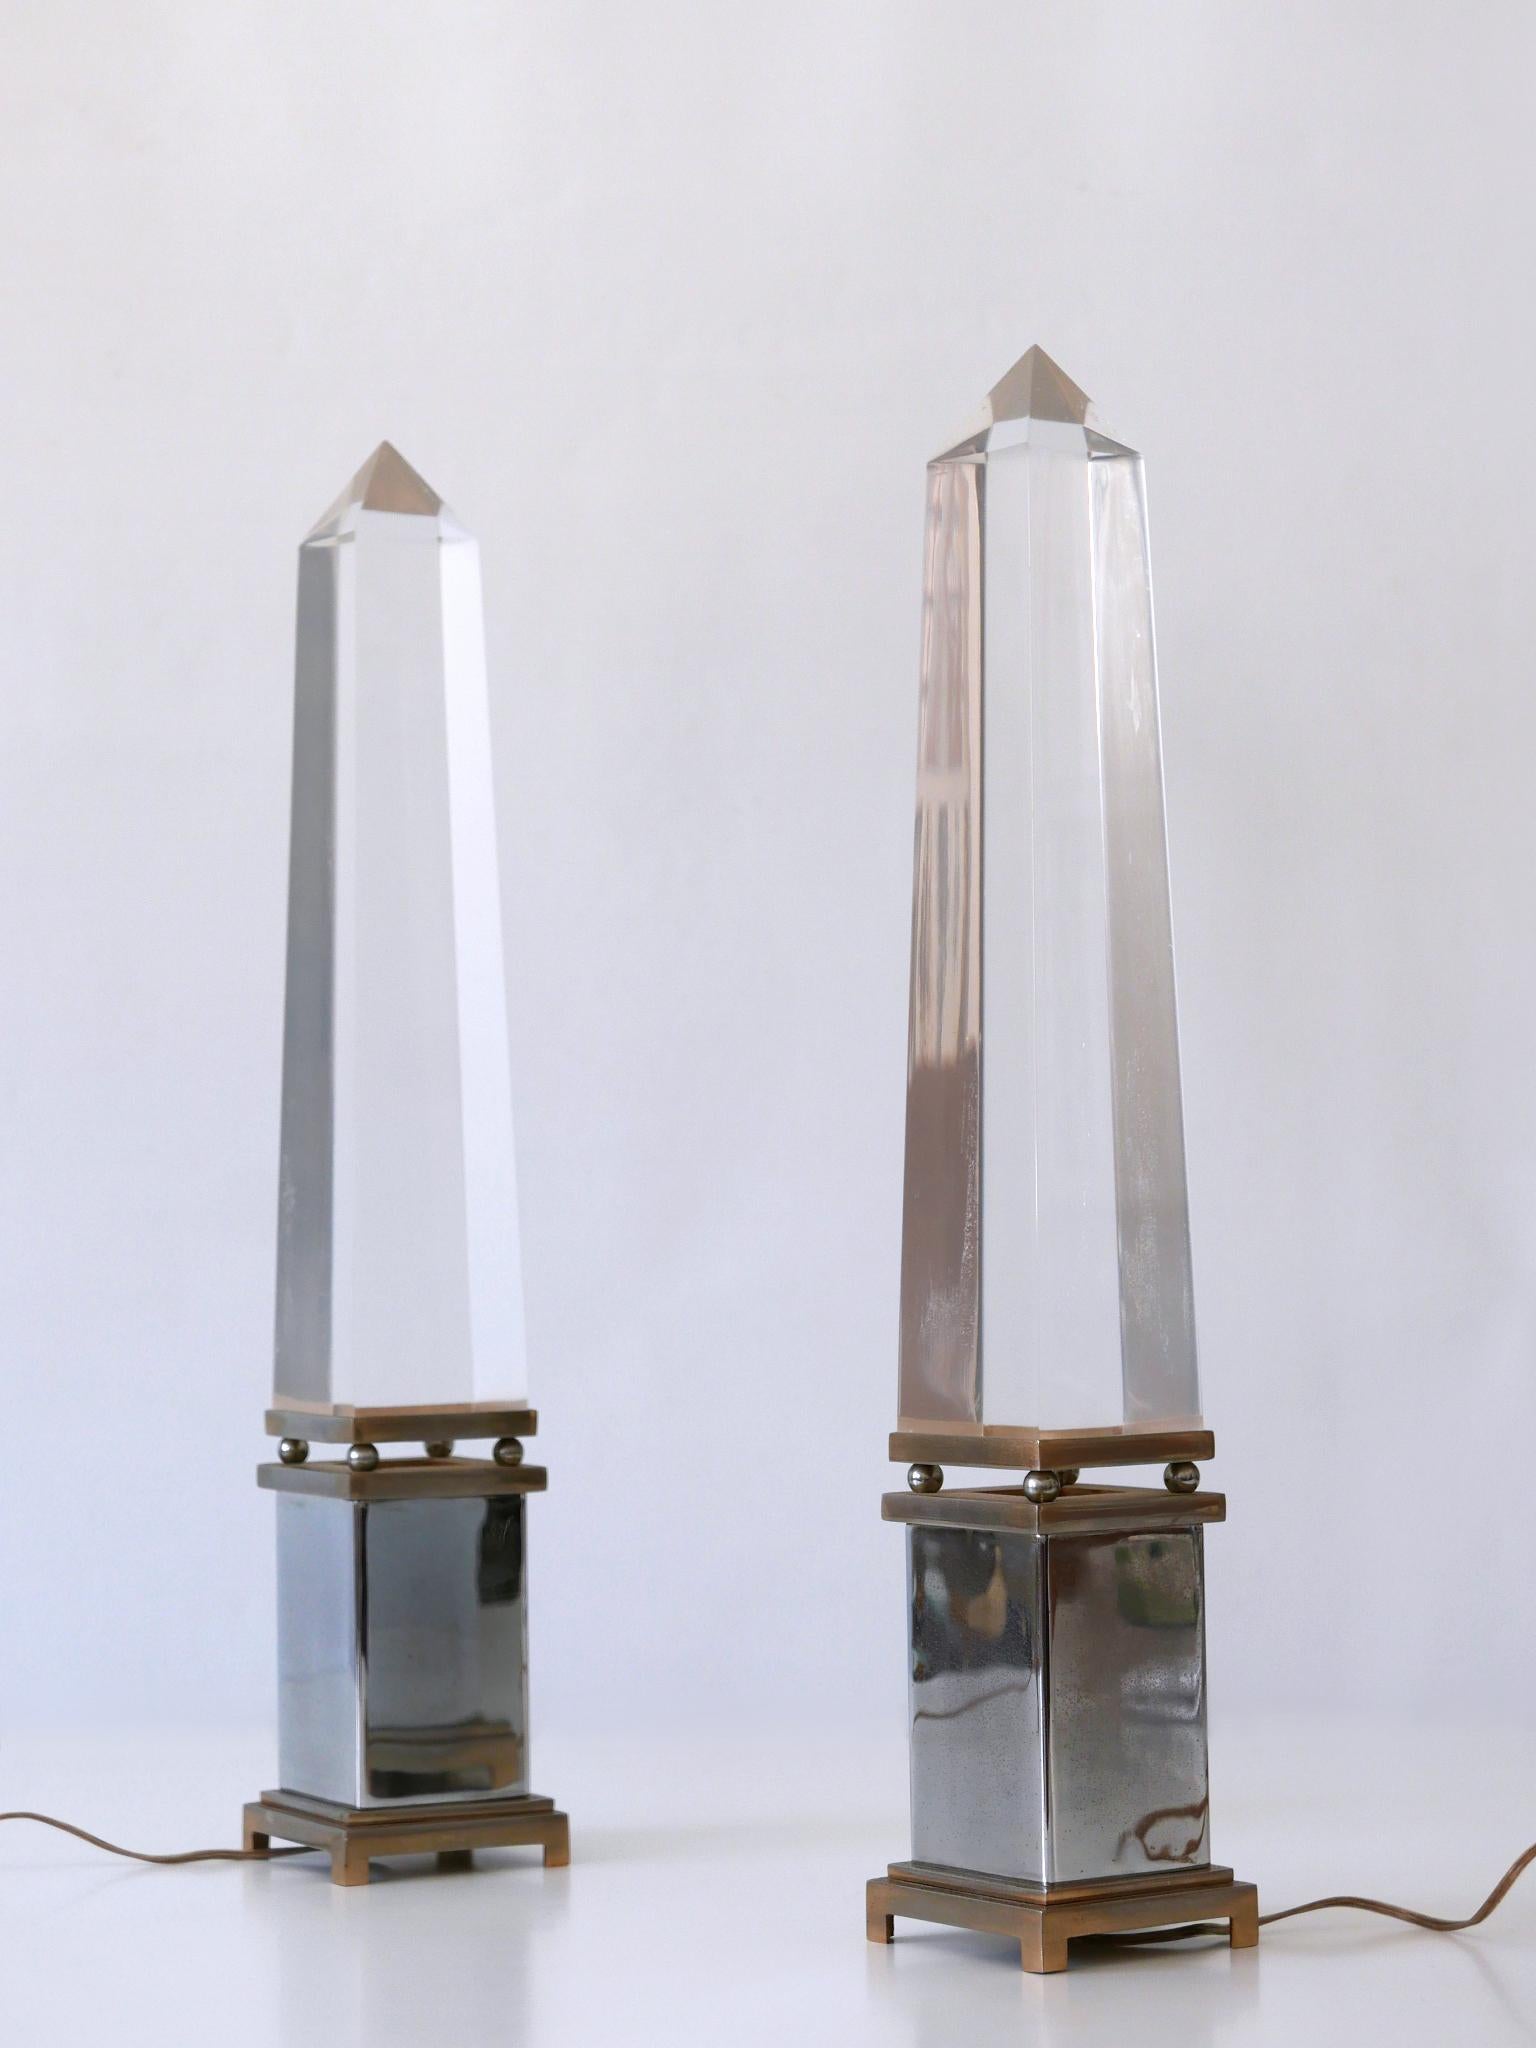 Set of two extremely rare Mid-Century Modern lucite table lamps in shape of an Obelisk. Designed by the Italian architect Sandro Petti for Maison Jansen, France, 1970s.

Executed in Lucite and metal. Each lamp needs 1 x E14 / E12 Edison screw fit